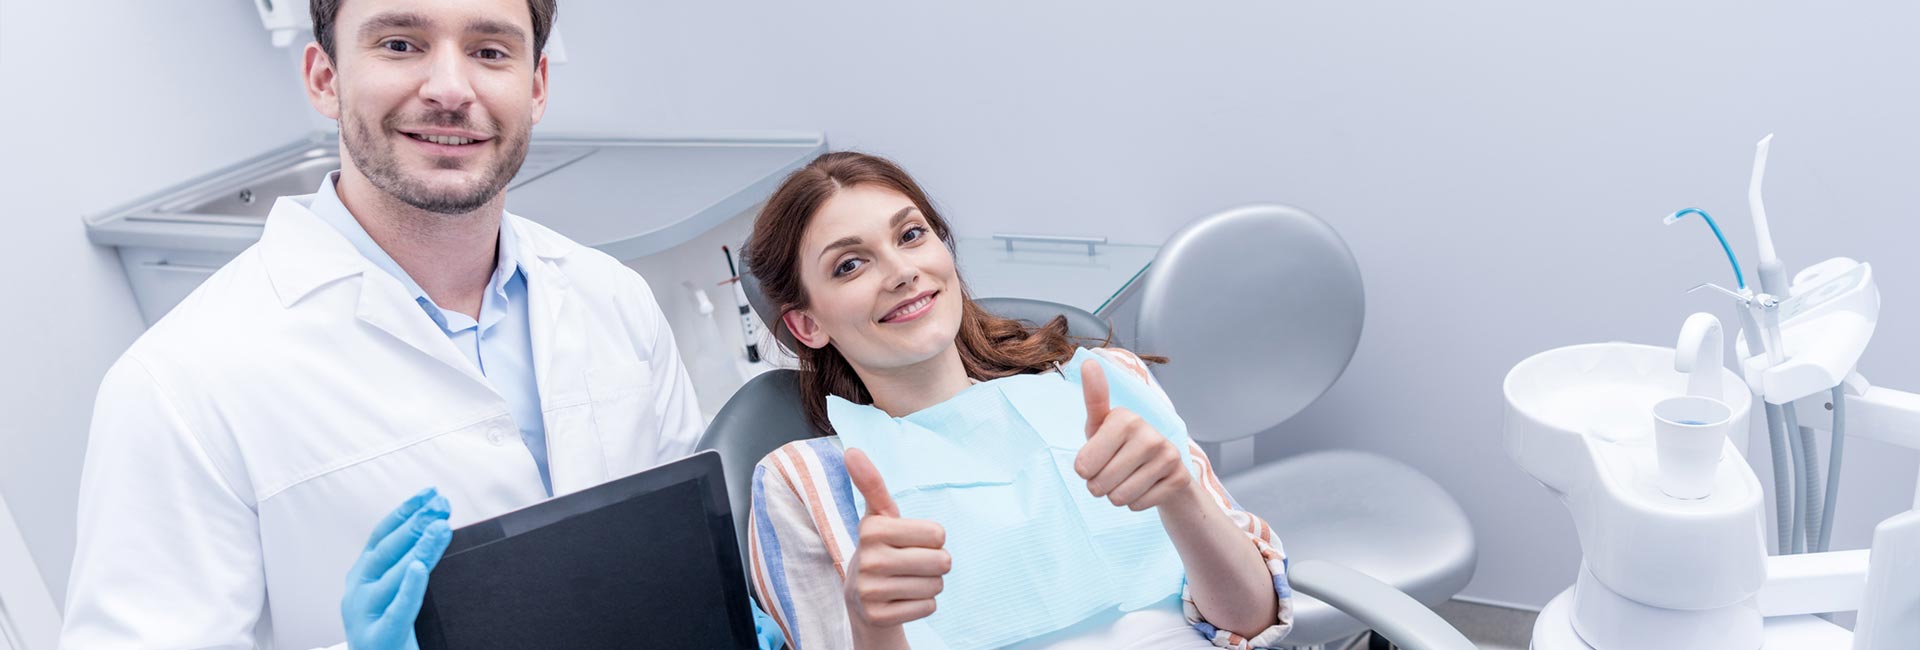 Woman showing thumbs up at the dentist